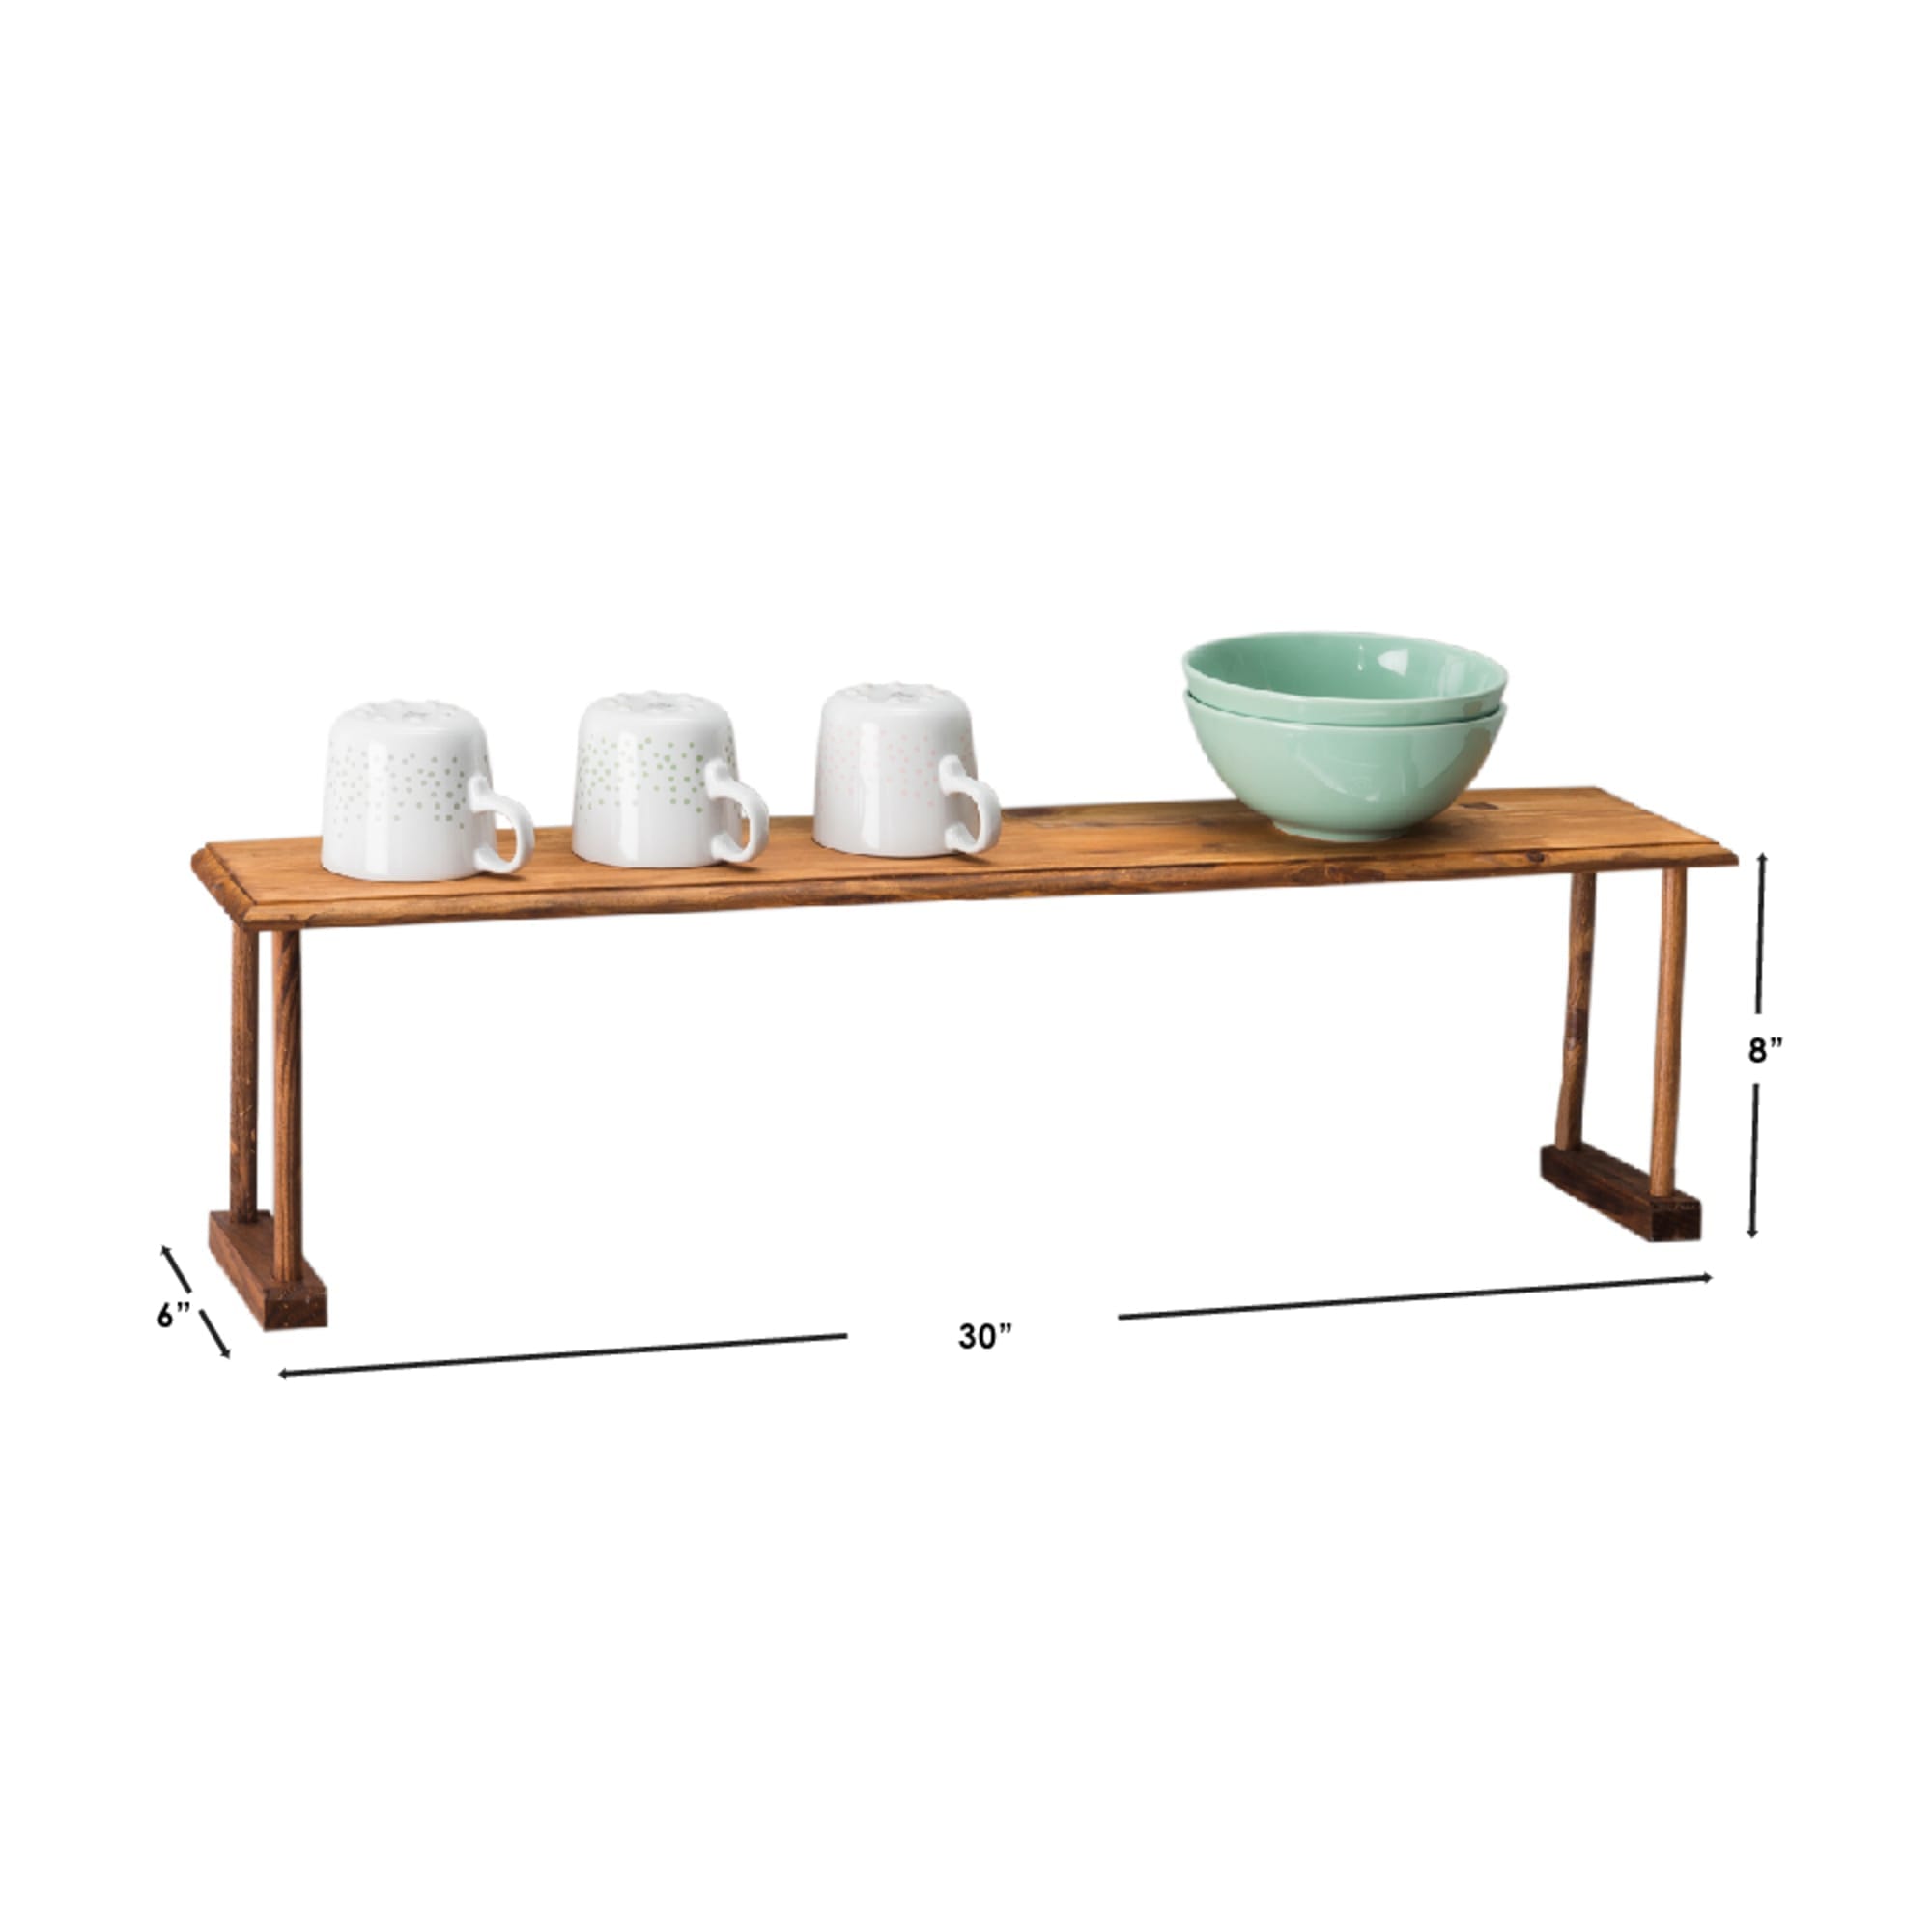 Home Basics Space-Saving Pine Wood Over the Sink Multi-Use Shelf $5.00 EACH, CASE PACK OF 6